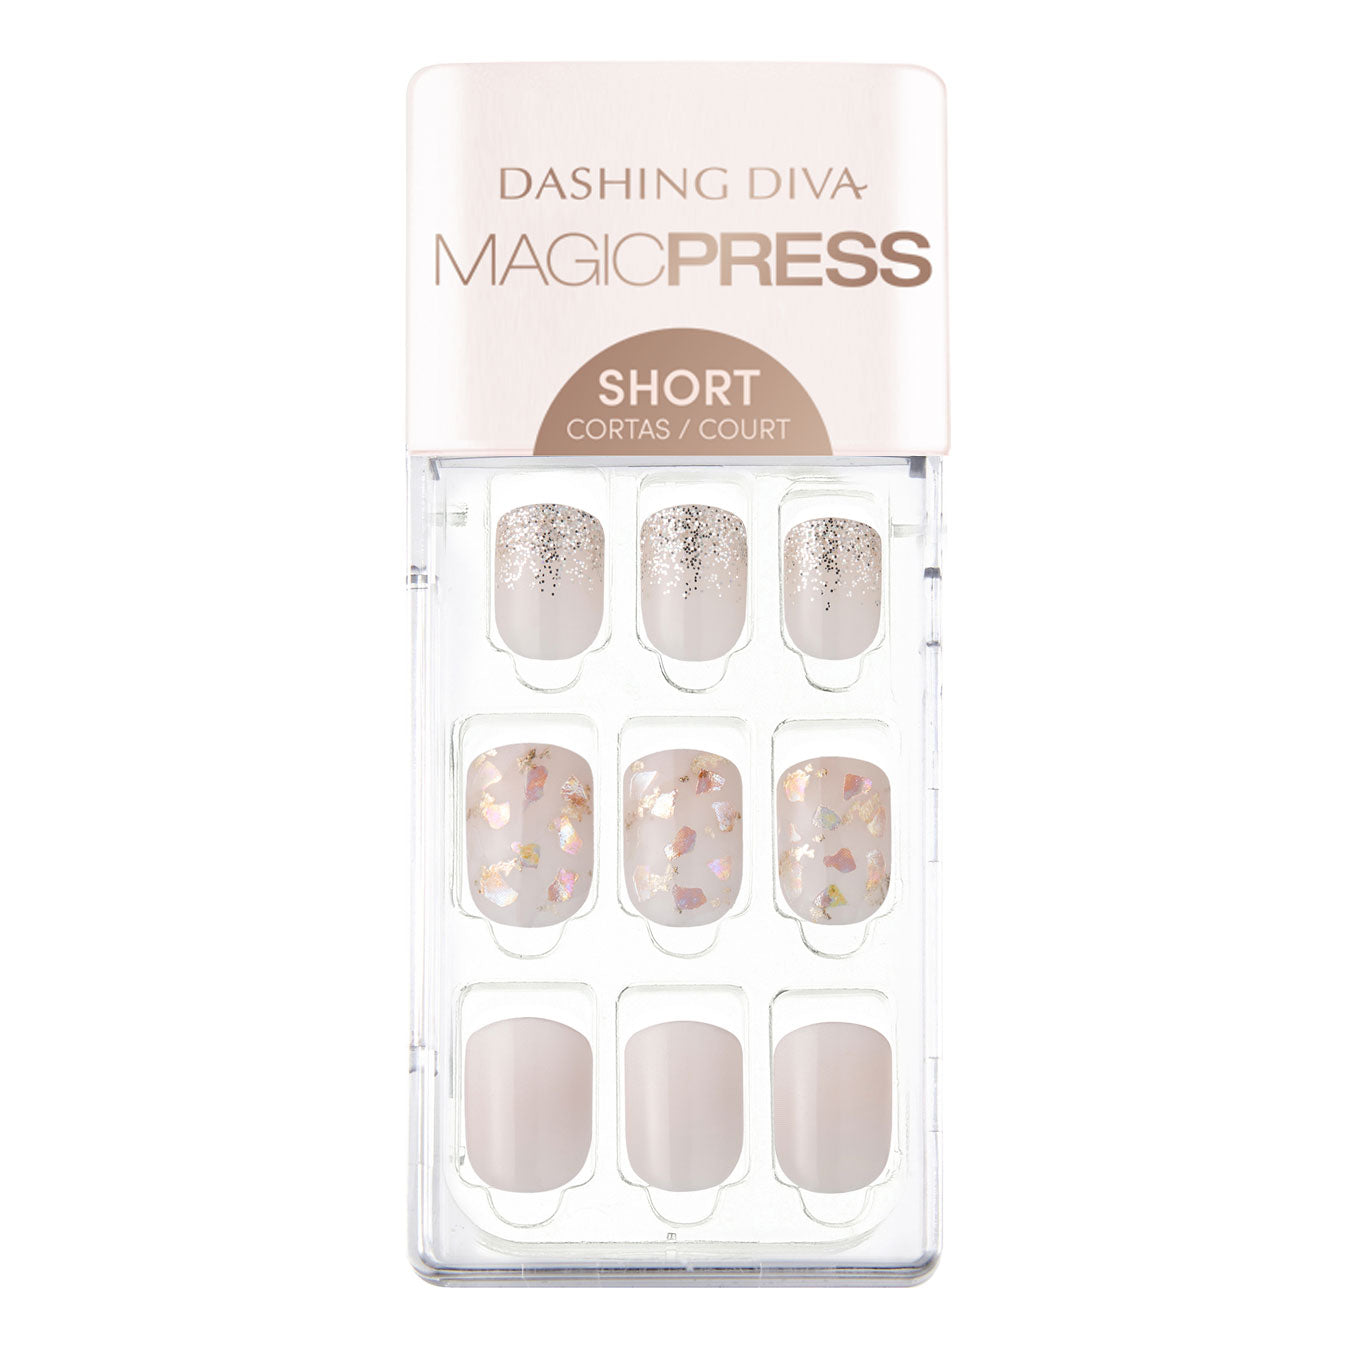 Dashing Diva MAGIC PRESS short, square neutral press on gel nails with mosaic and glitter accents.